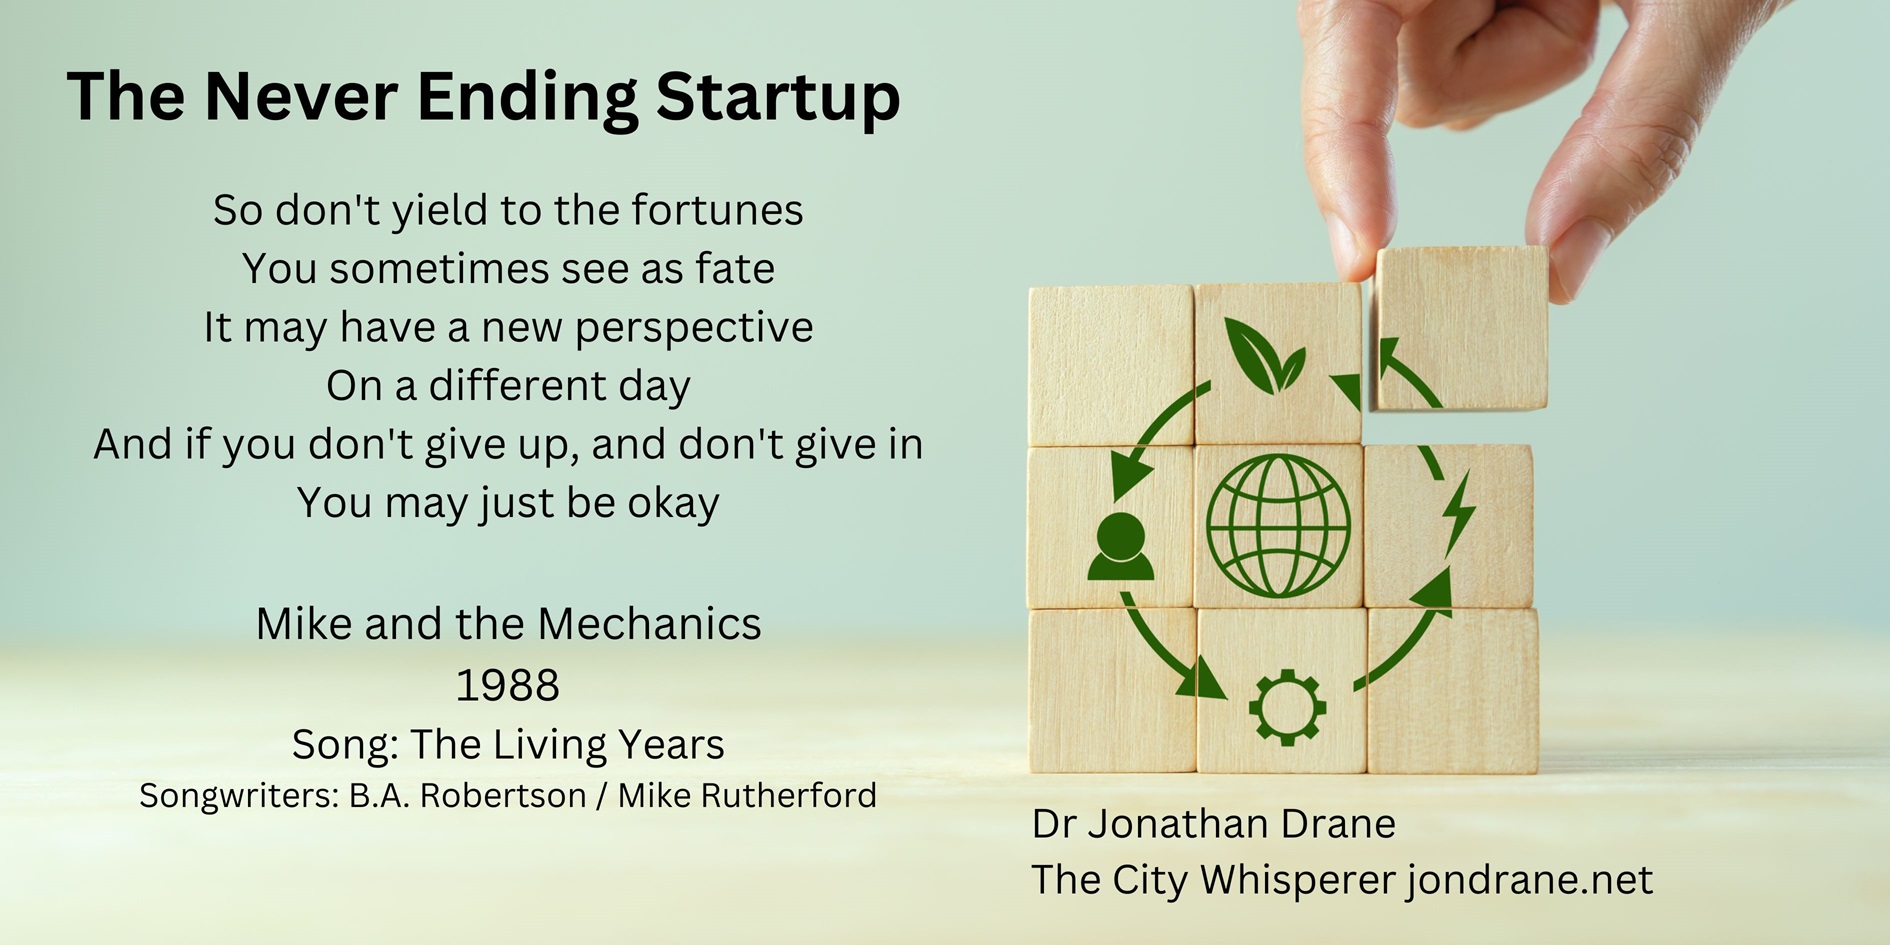 The Never Ending Startup Podcast by Dr Jon Drane The City Whisperer. on jondrane.net Startup journey and stories of longevity Quote Mike and the Mechanics The Oiving YEars